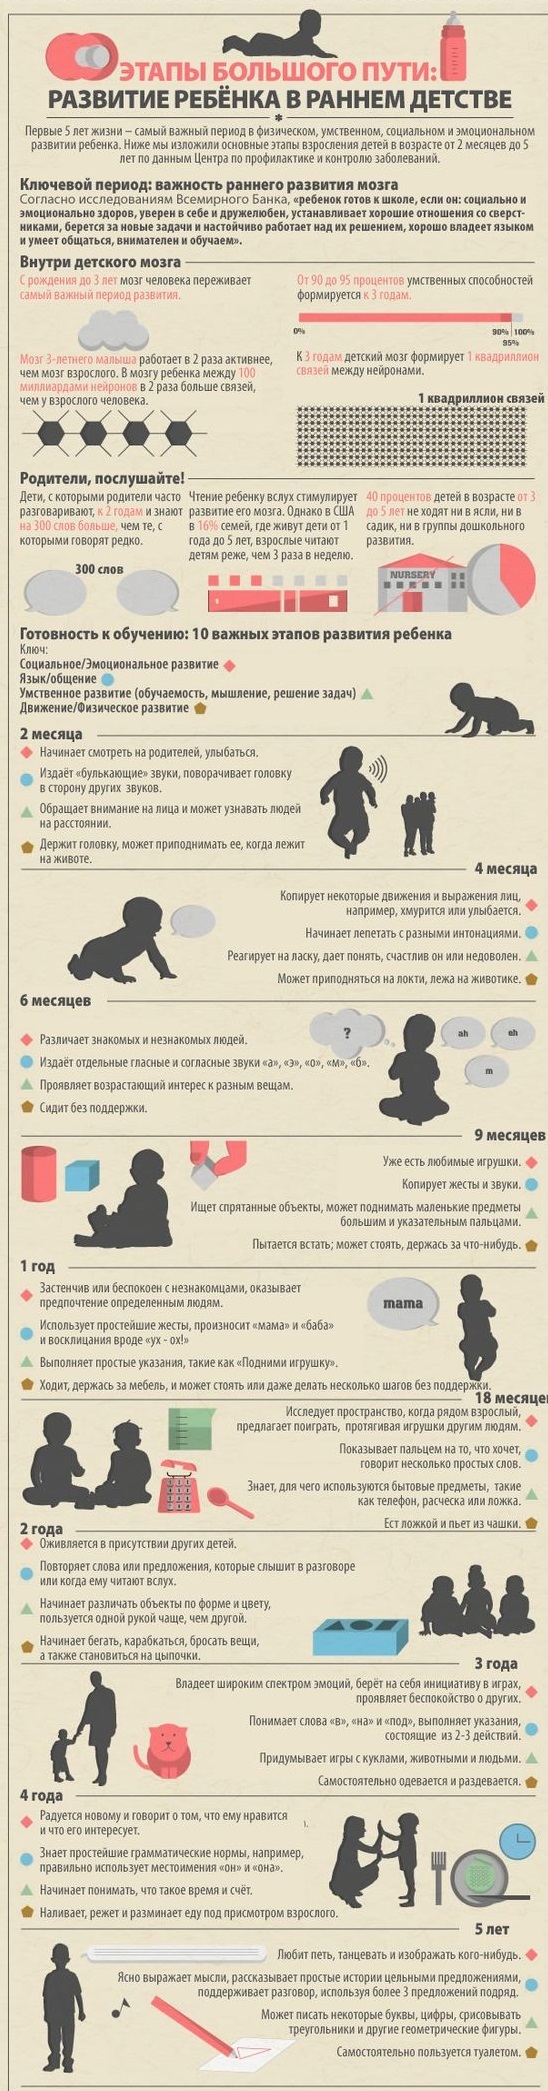 Child development in early childhood - Infographics, Child development, Childhood, Children, Longpost